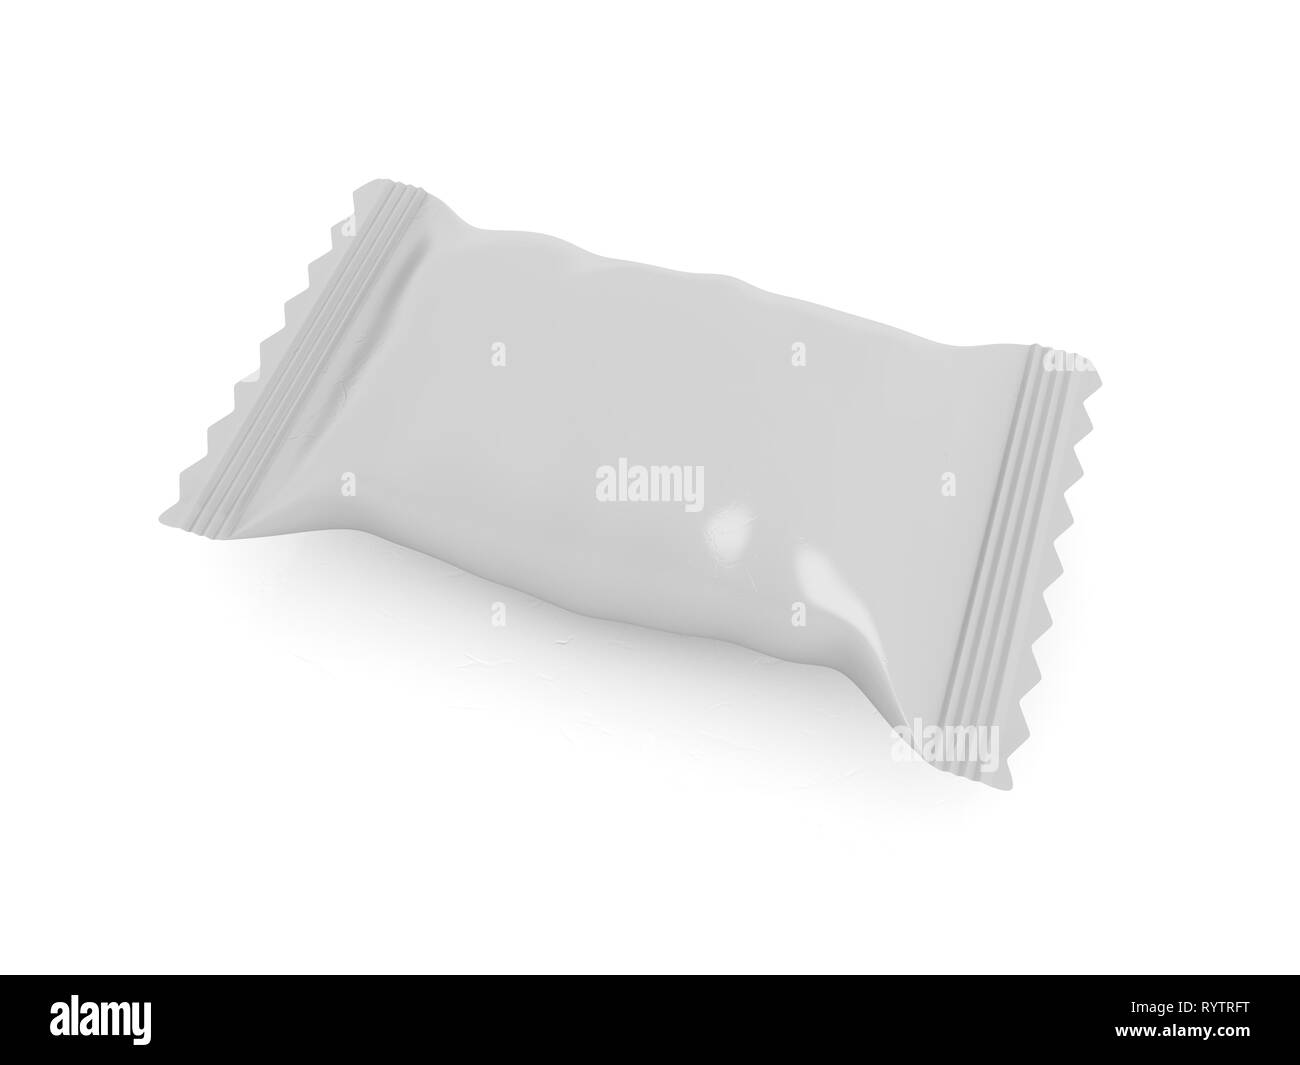 candy packaging mockup 3d rendering isolated Stock Photo - Alamy